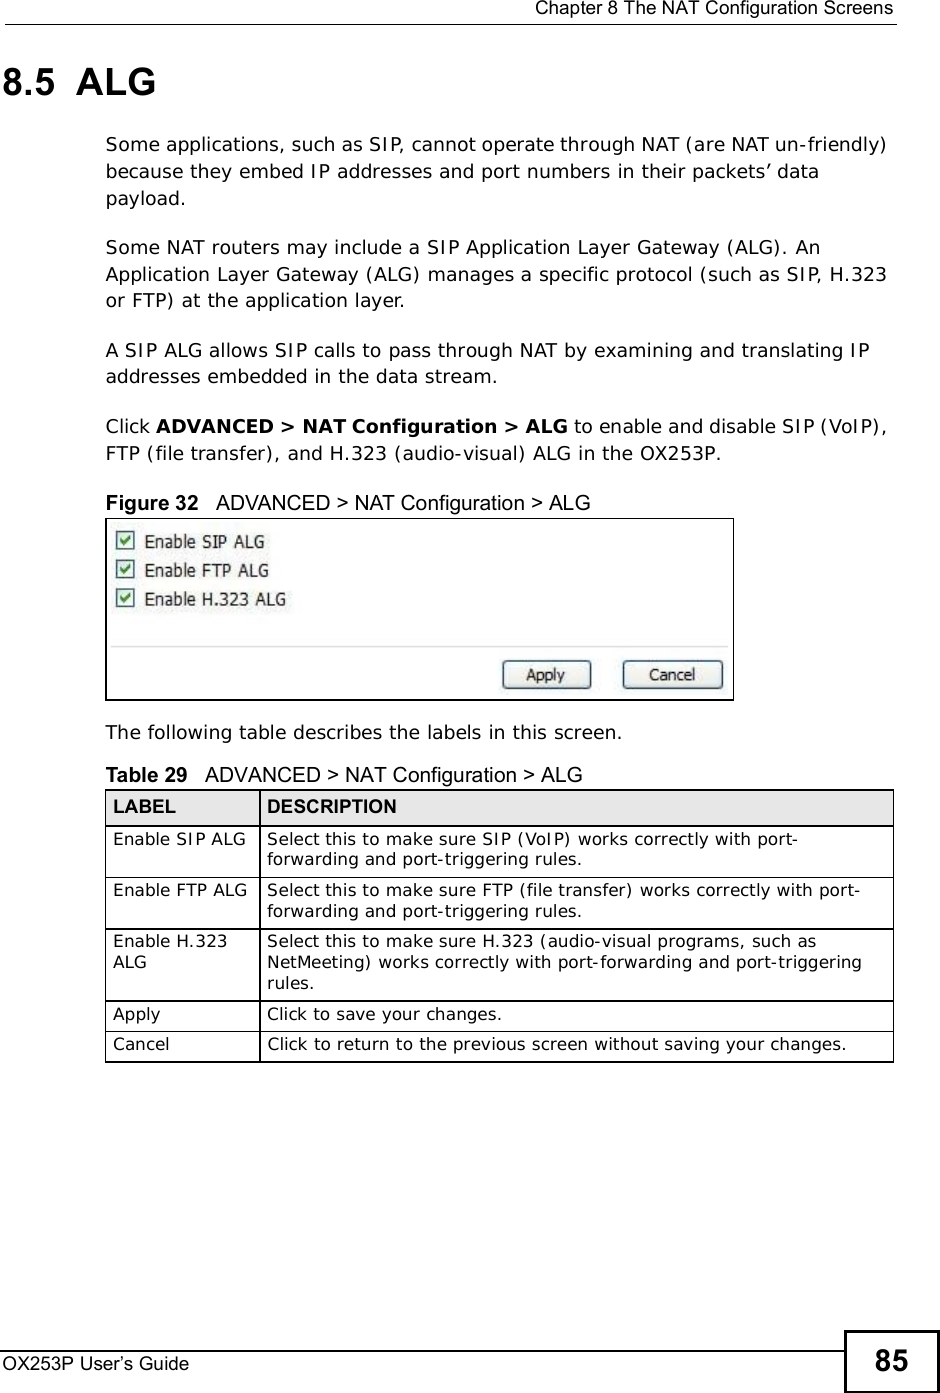  Chapter 8The NAT Configuration ScreensOX253P User’s Guide 858.5  ALGSome applications, such as SIP, cannot operate through NAT (are NAT un-friendly) because they embed IP addresses and port numbers in their packets’ data payload. Some NAT routers may include a SIP Application Layer Gateway (ALG). An Application Layer Gateway (ALG) manages a specific protocol (such as SIP, H.323 or FTP) at the application layer. A SIP ALG allows SIP calls to pass through NAT by examining and translating IP addresses embedded in the data stream.Click ADVANCED &gt; NAT Configuration &gt; ALG to enable and disable SIP (VoIP), FTP (file transfer), and H.323 (audio-visual) ALG in the OX253P.Figure 32   ADVANCED &gt; NAT Configuration &gt; ALGThe following table describes the labels in this screen.Table 29   ADVANCED &gt; NAT Configuration &gt; ALGLABEL DESCRIPTIONEnable SIP ALG Select this to make sure SIP (VoIP) works correctly with port-forwarding and port-triggering rules.Enable FTP ALG Select this to make sure FTP (file transfer) works correctly with port-forwarding and port-triggering rules.Enable H.323 ALG Select this to make sure H.323 (audio-visual programs, such as NetMeeting) works correctly with port-forwarding and port-triggering rules.Apply Click to save your changes.CancelClick to return to the previous screen without saving your changes.